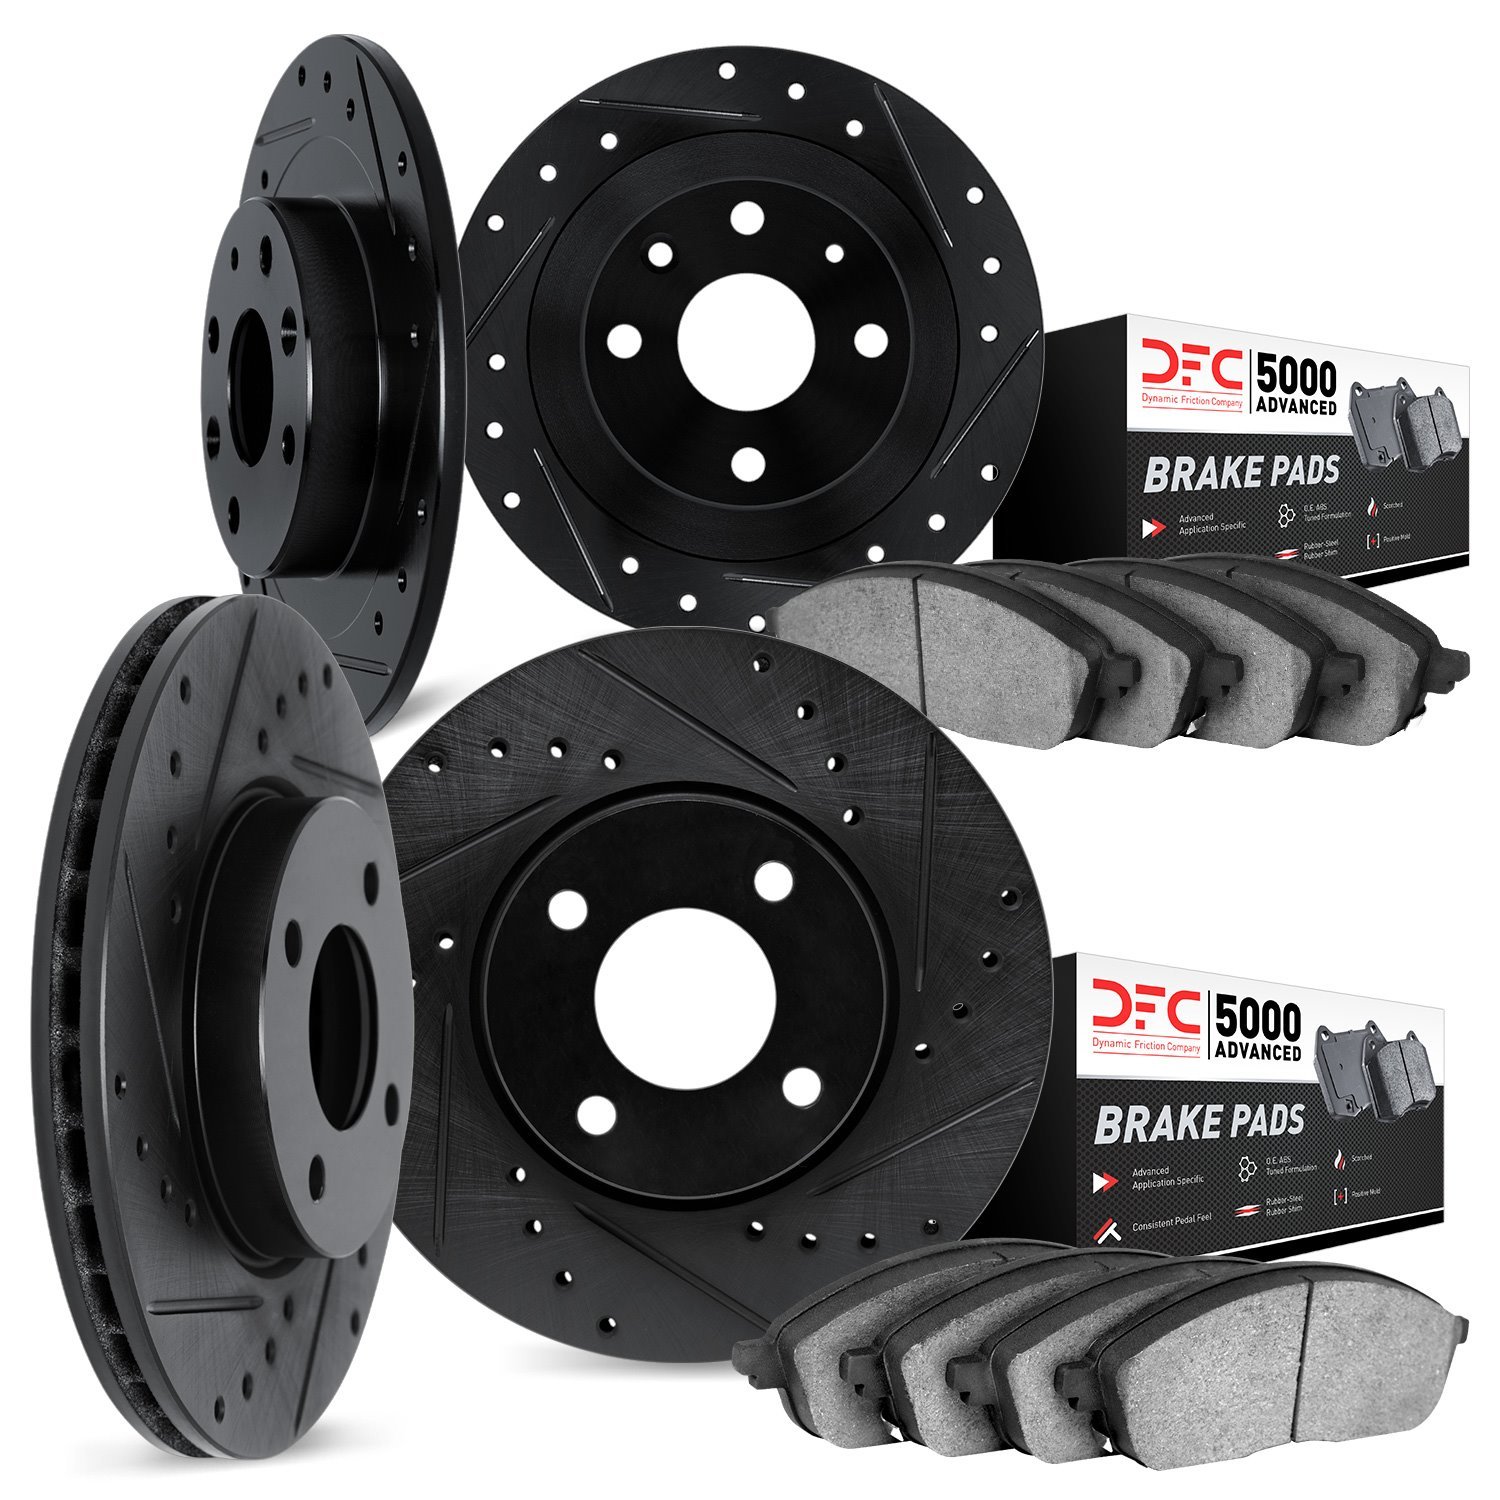 8504-60000 Drilled/Slotted Brake Rotors w/5000 Advanced Brake Pads Kit [Black], 1987-1991 Sterling, Position: Front and Rear